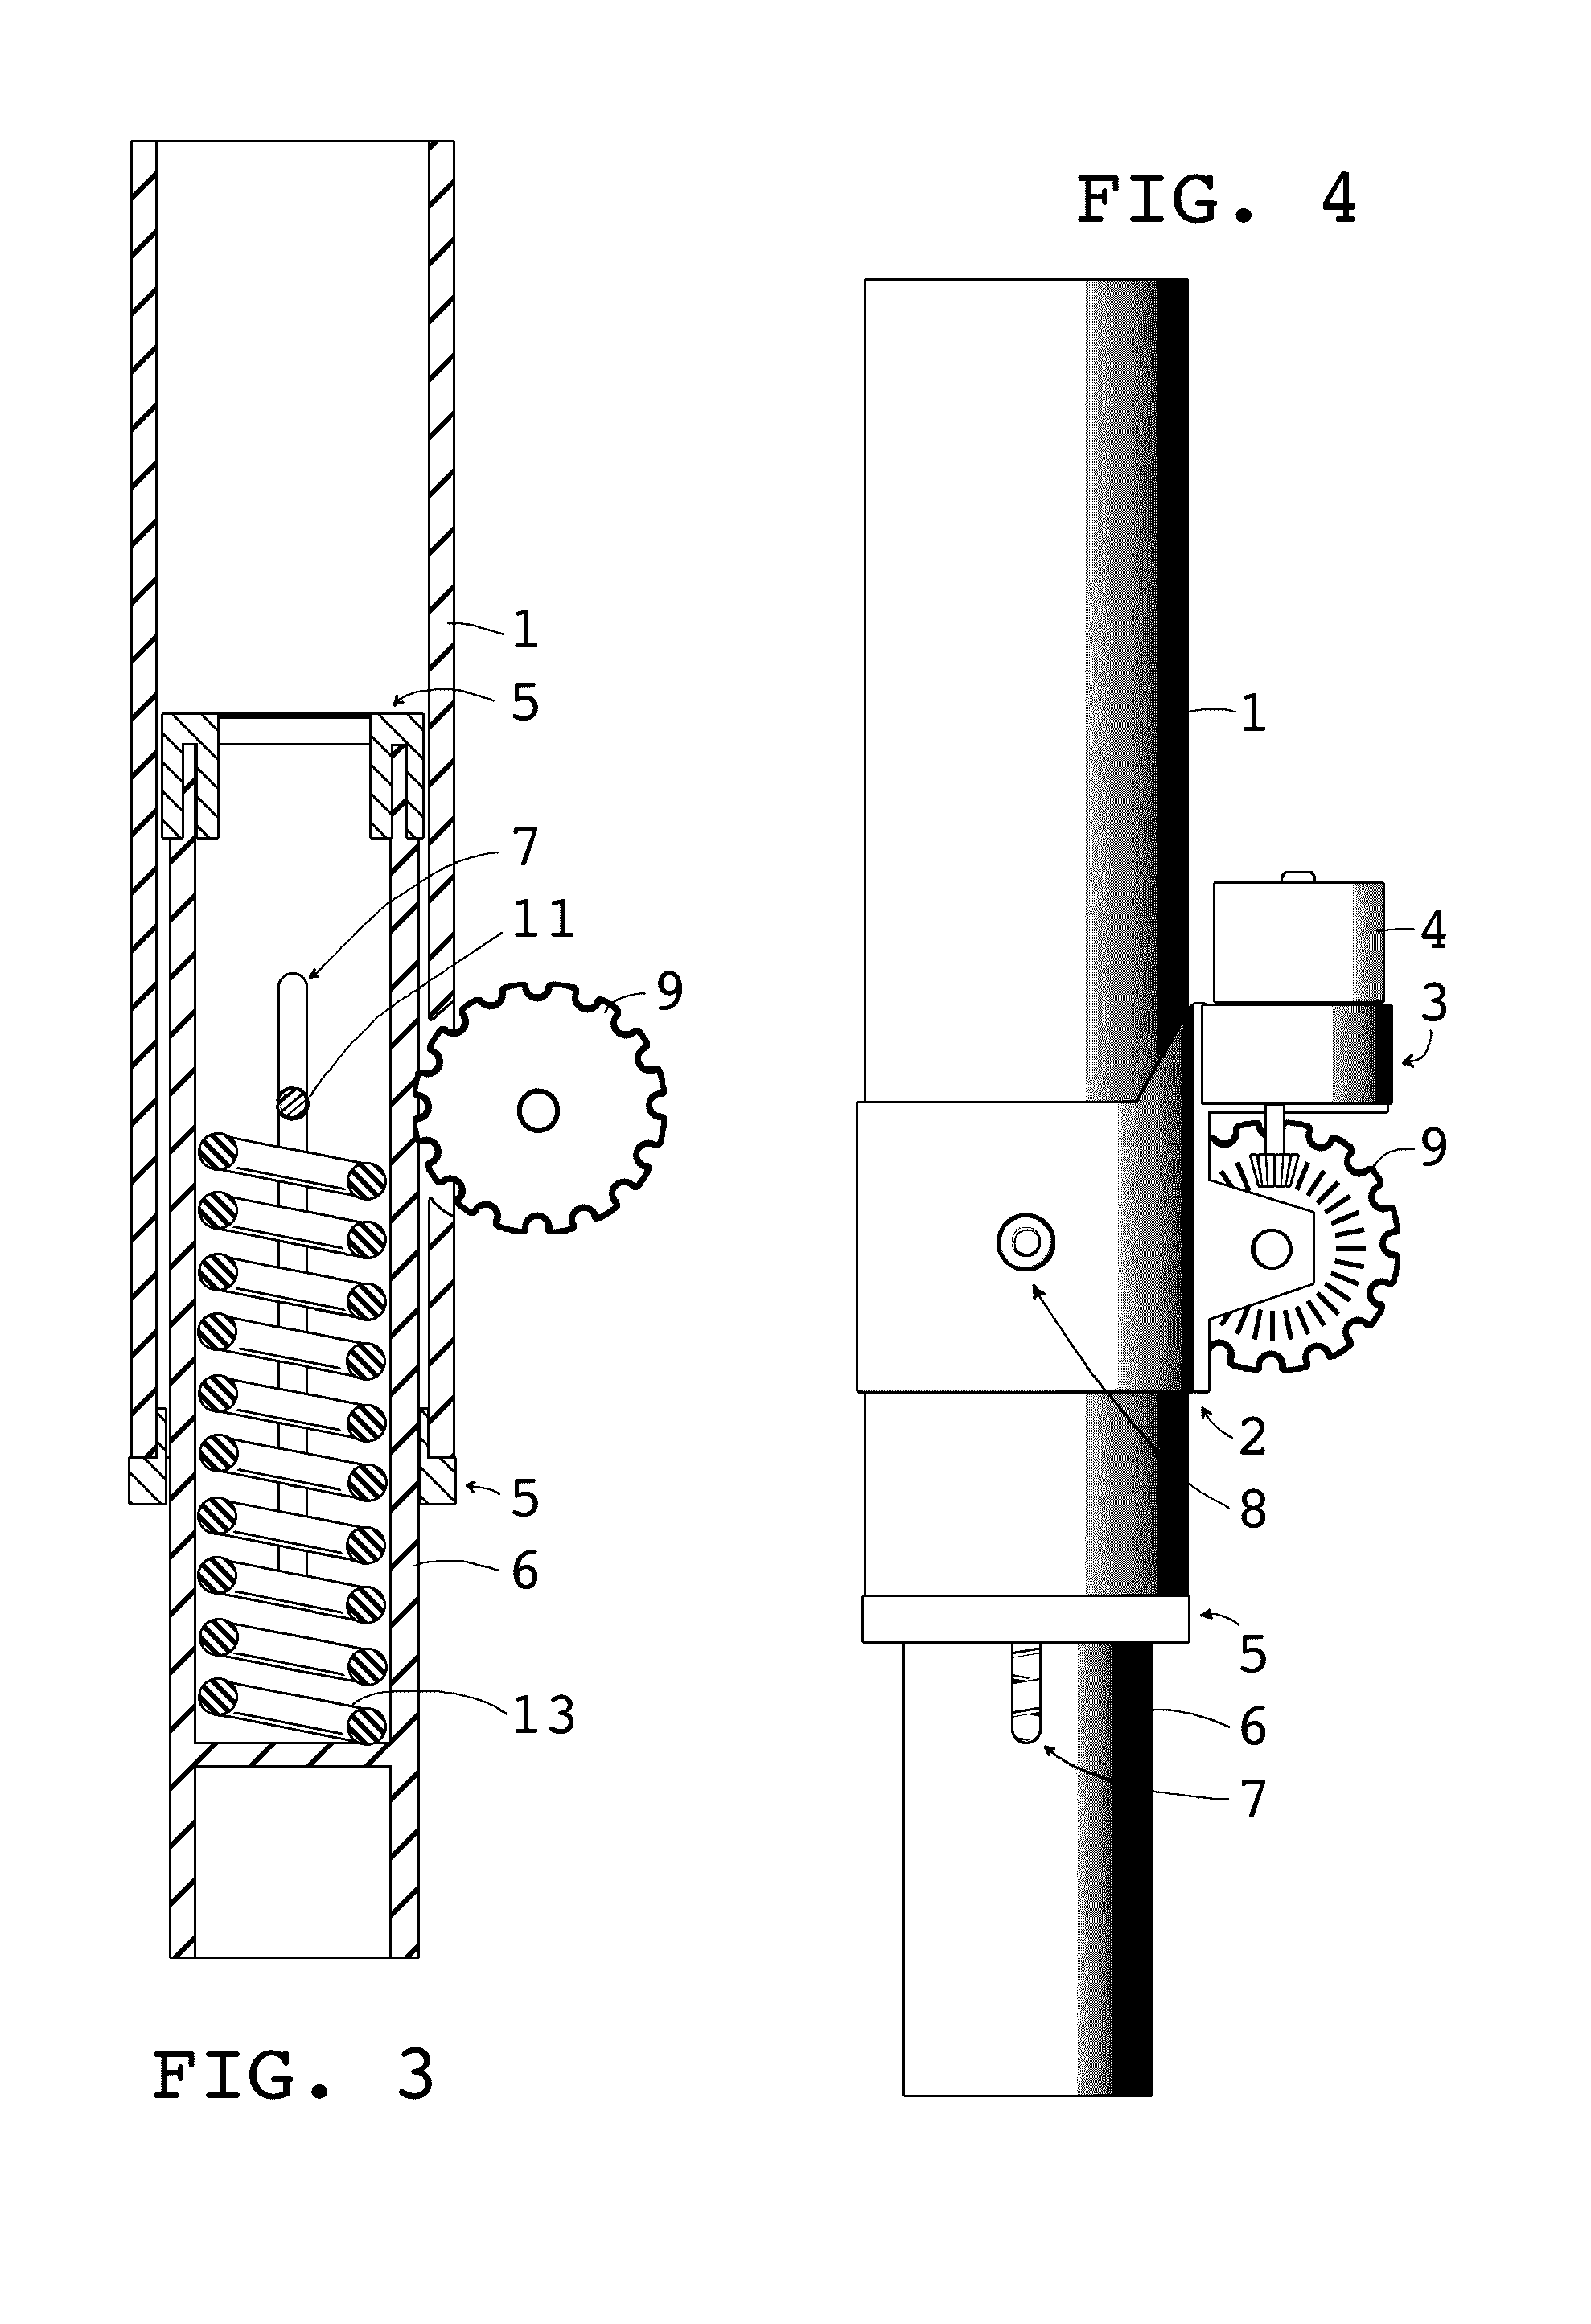 Active electromechanical suspension and power generation system using an acceleration controller